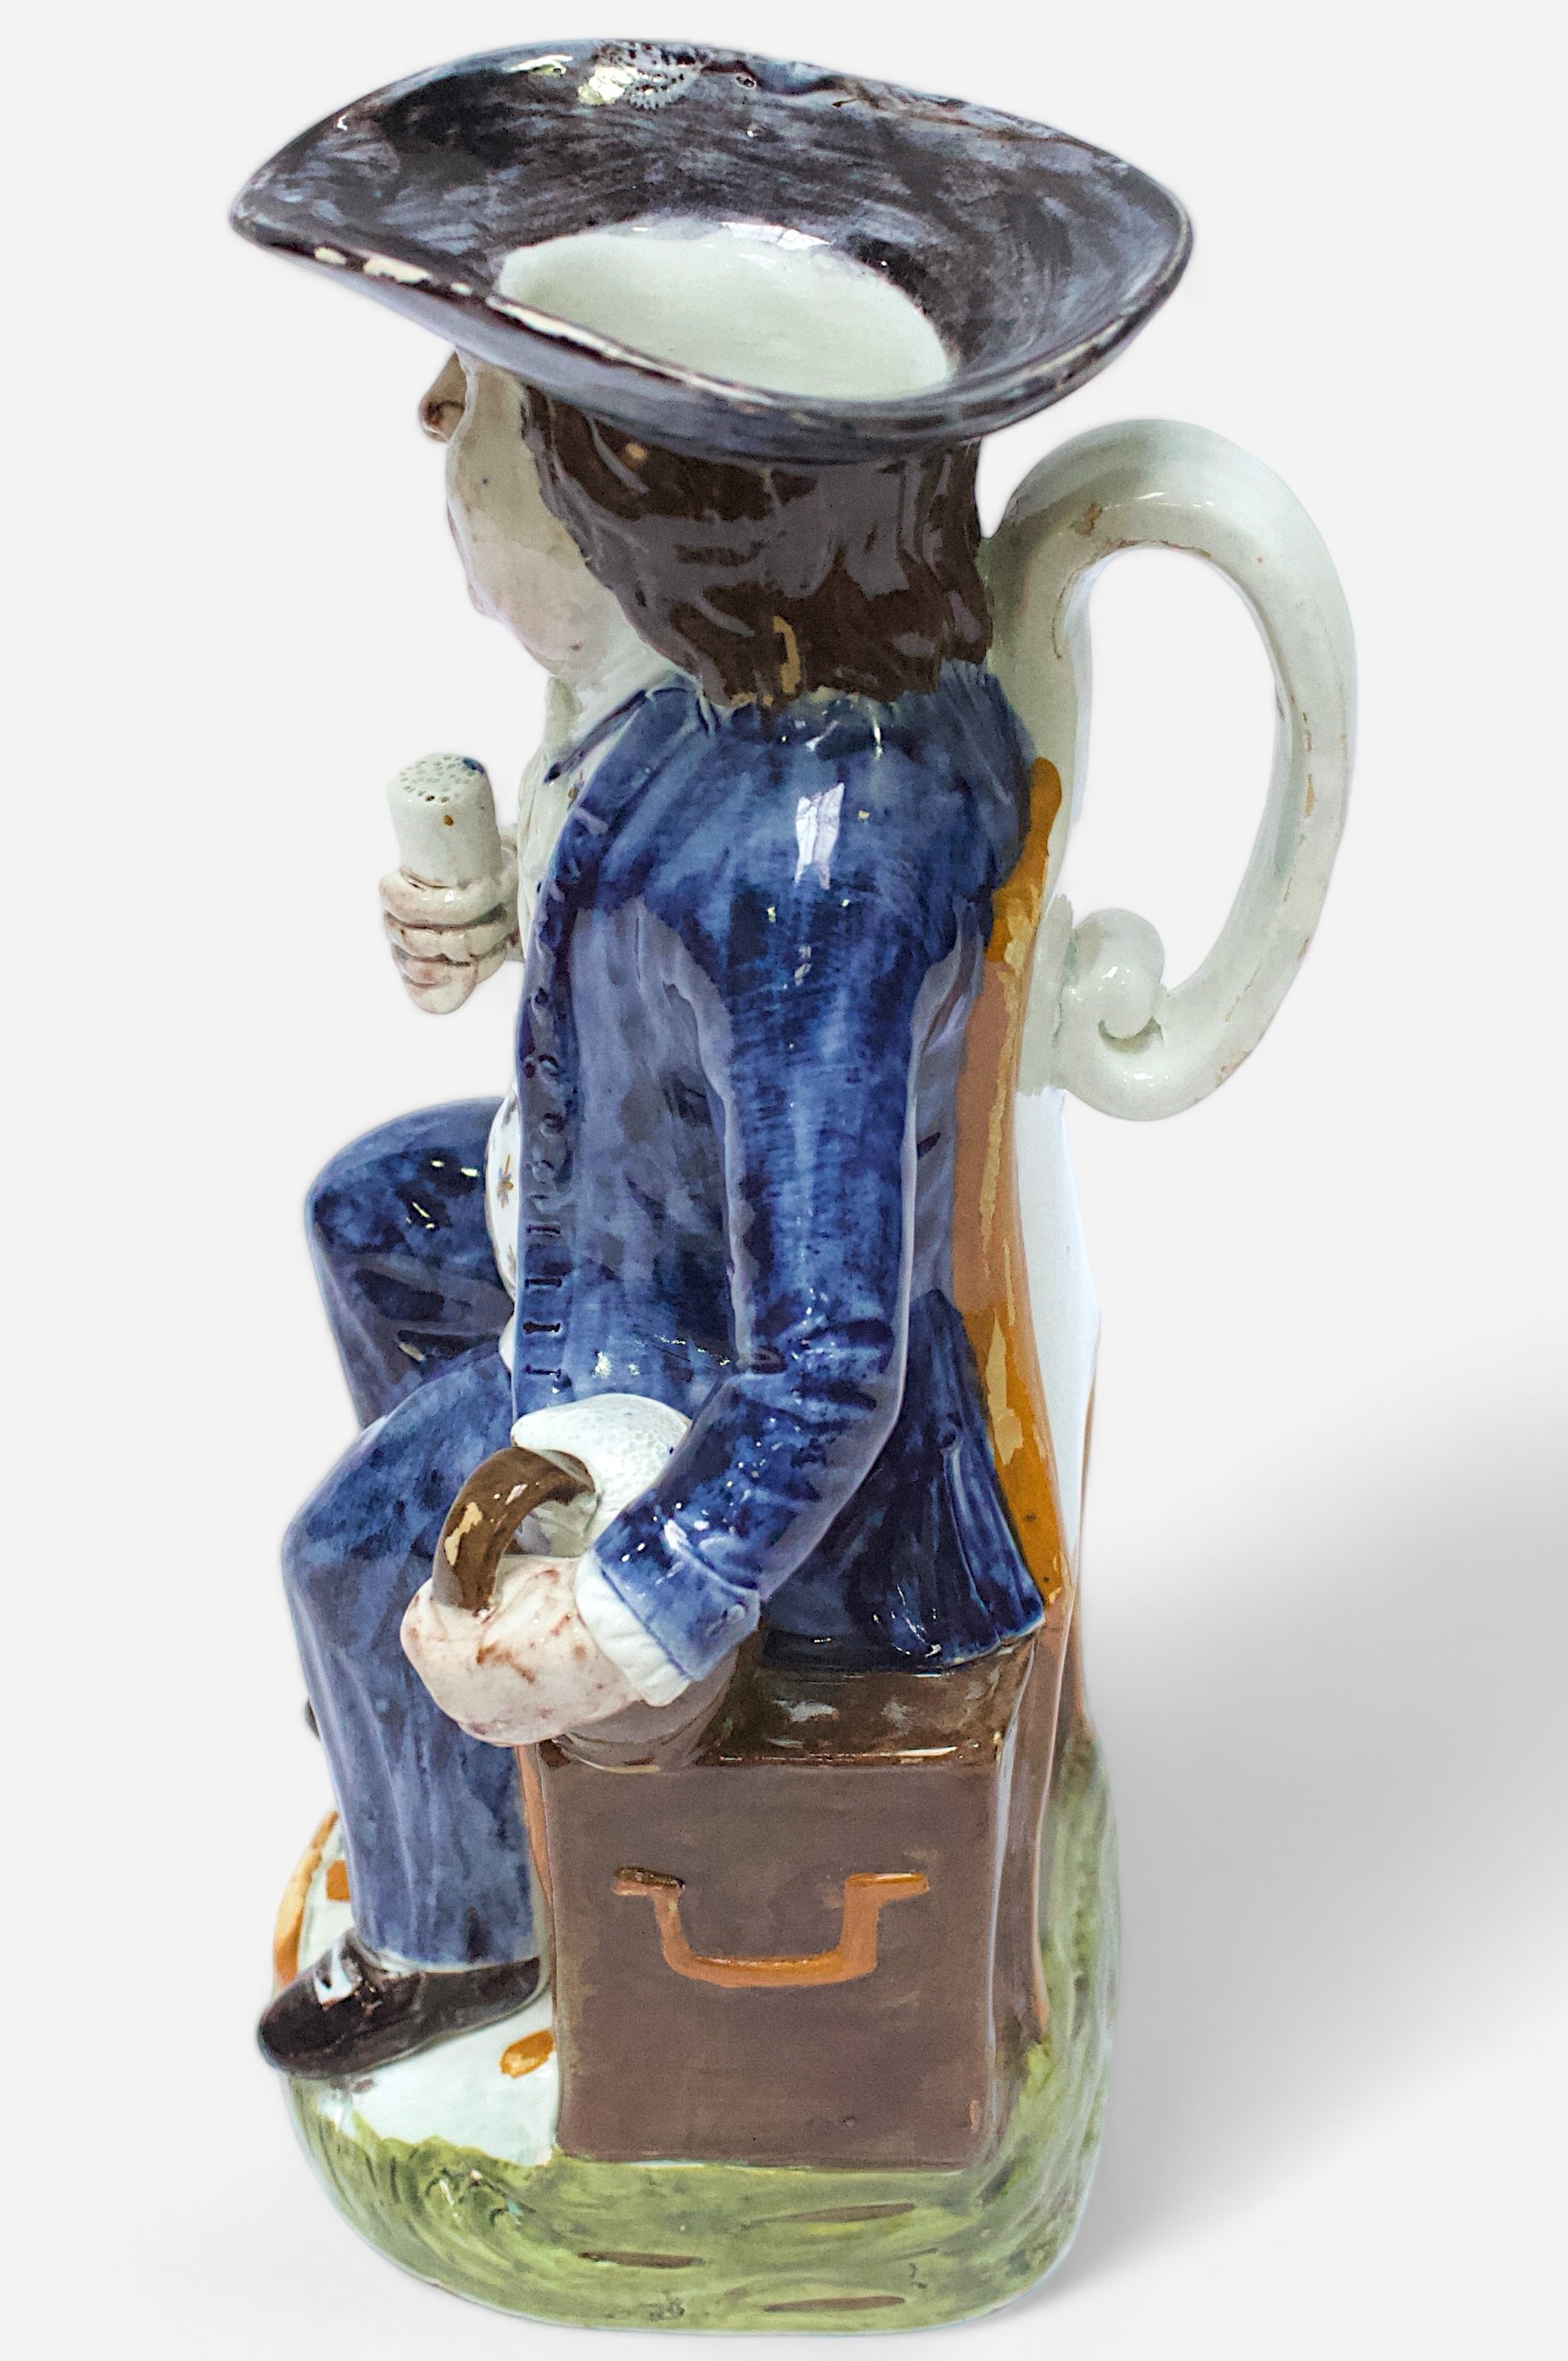 A Prattware ‘Sailor’ toby jug, c1790-1810, blue frockcoat and britches, waistcoat painted with - Image 4 of 4